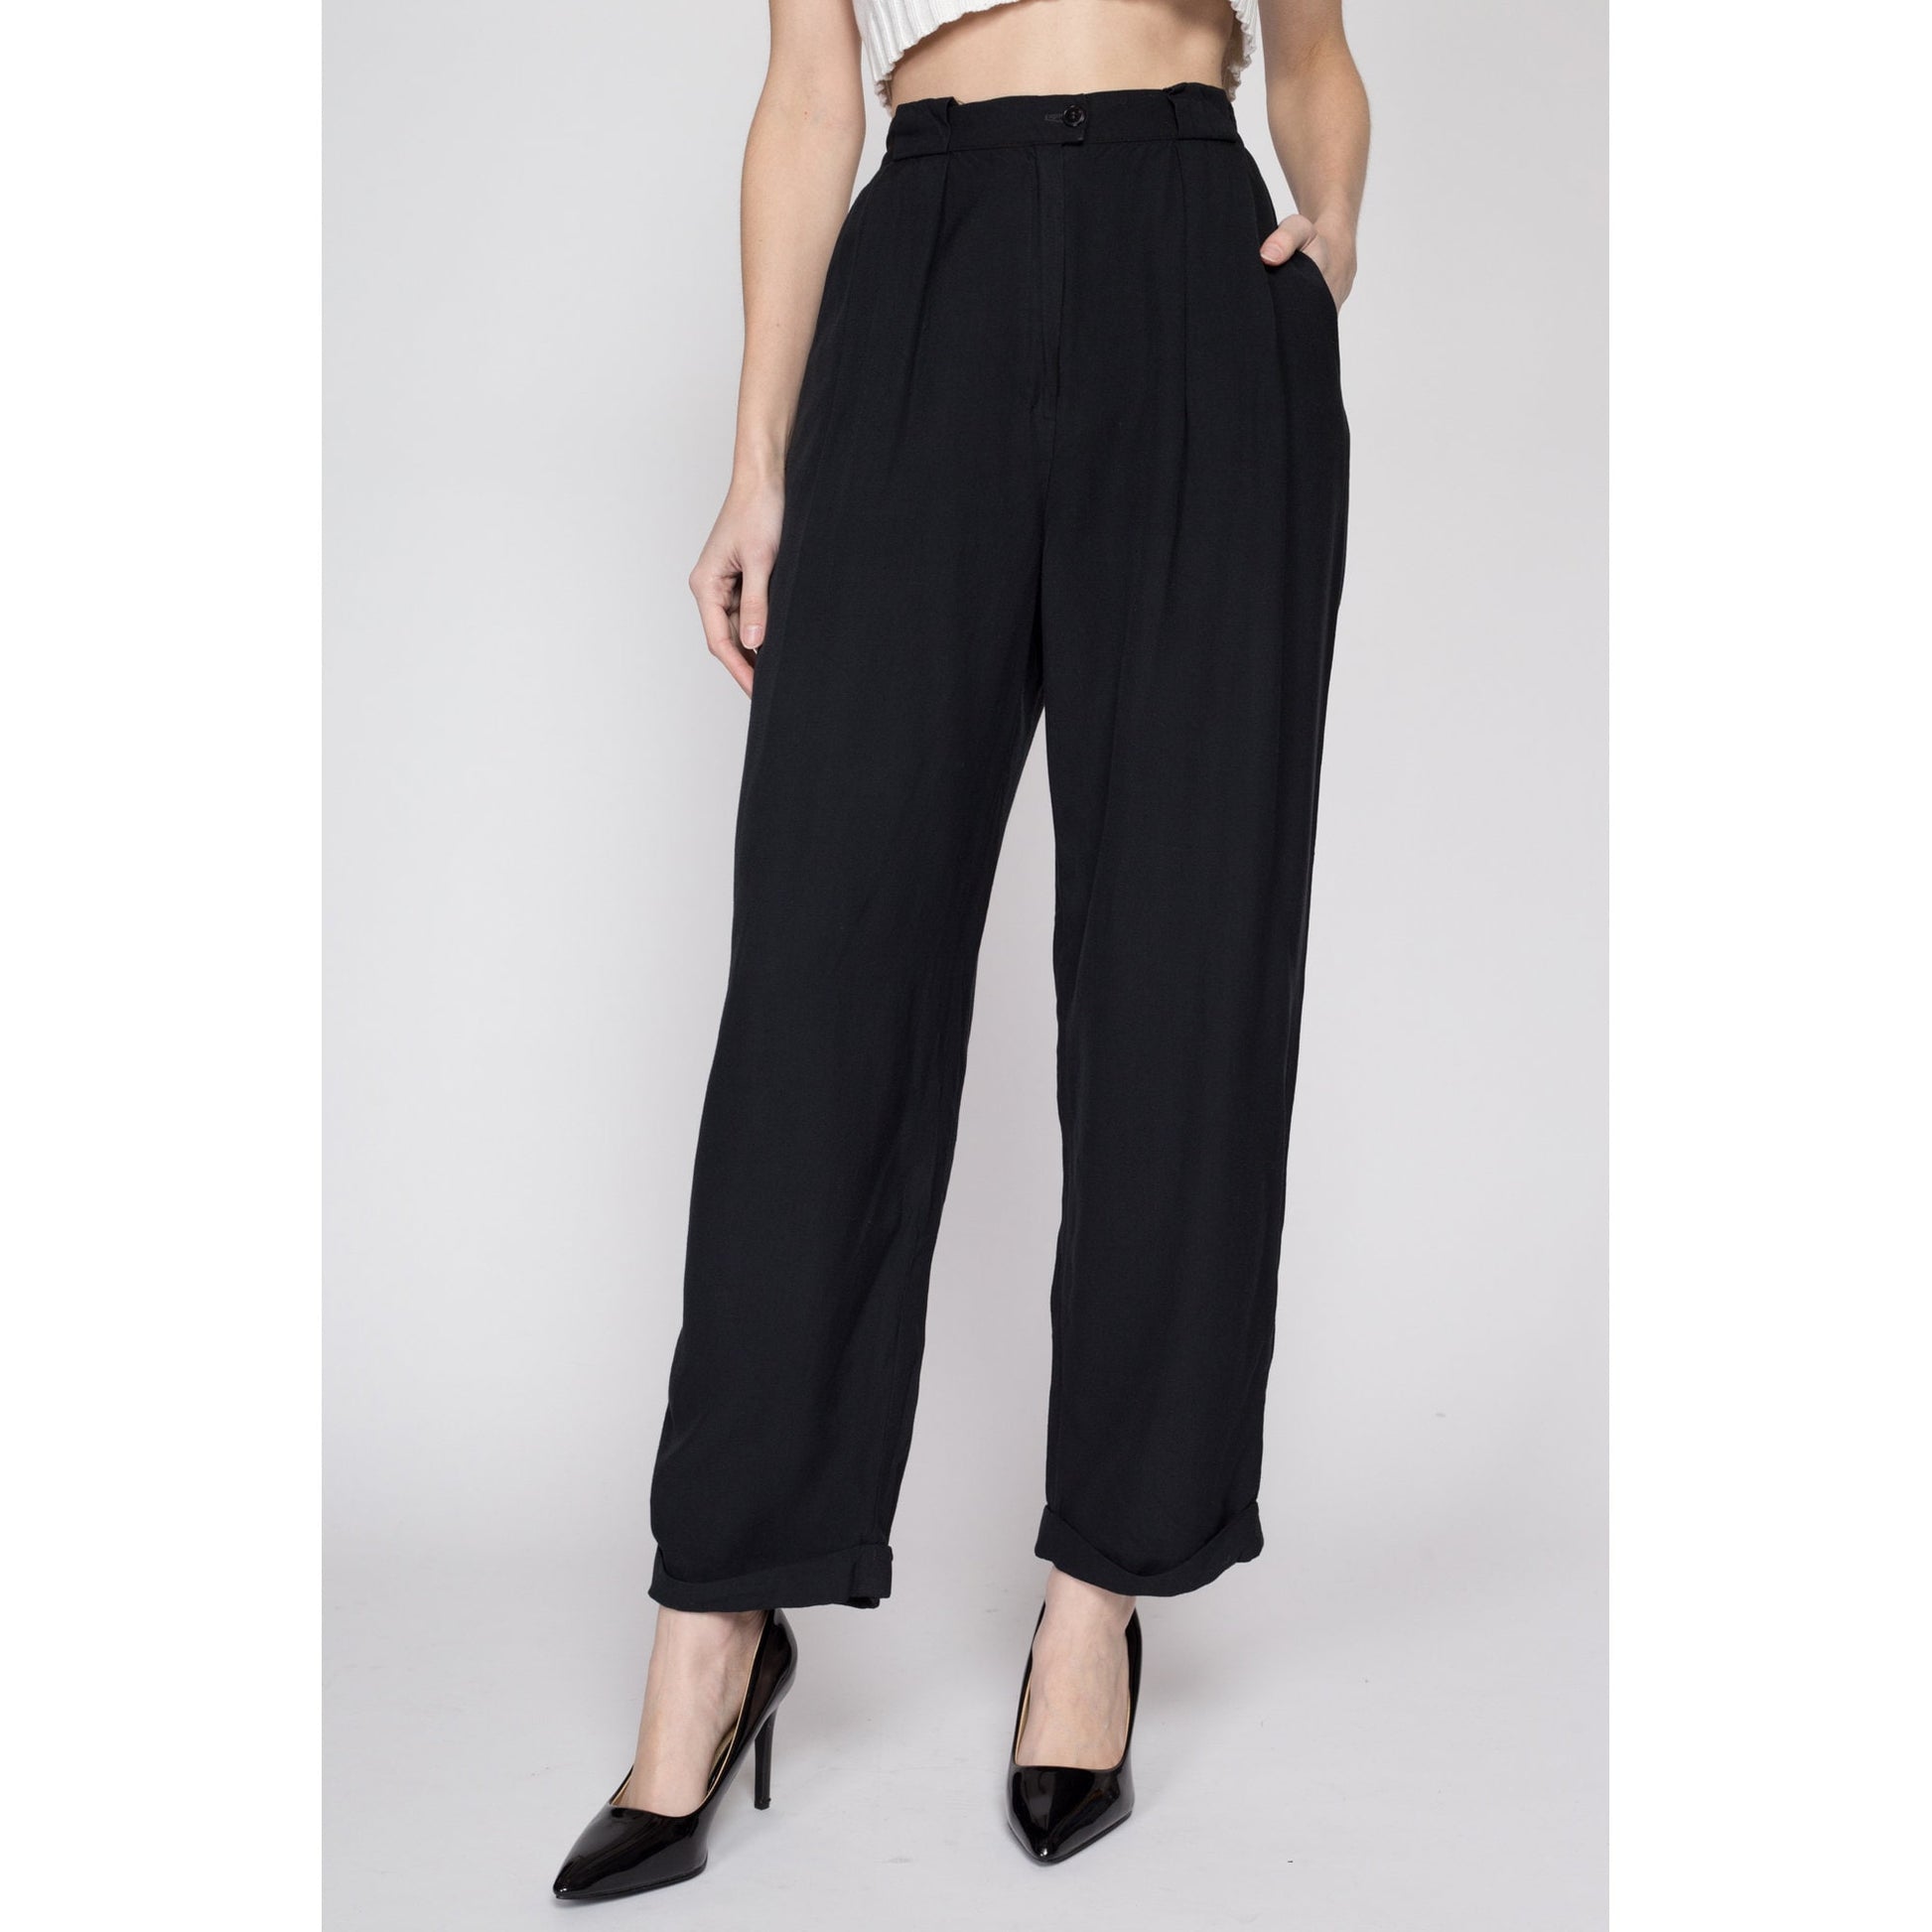 XS 80s Black High Waisted Pleated Trousers 24.5 – Flying Apple